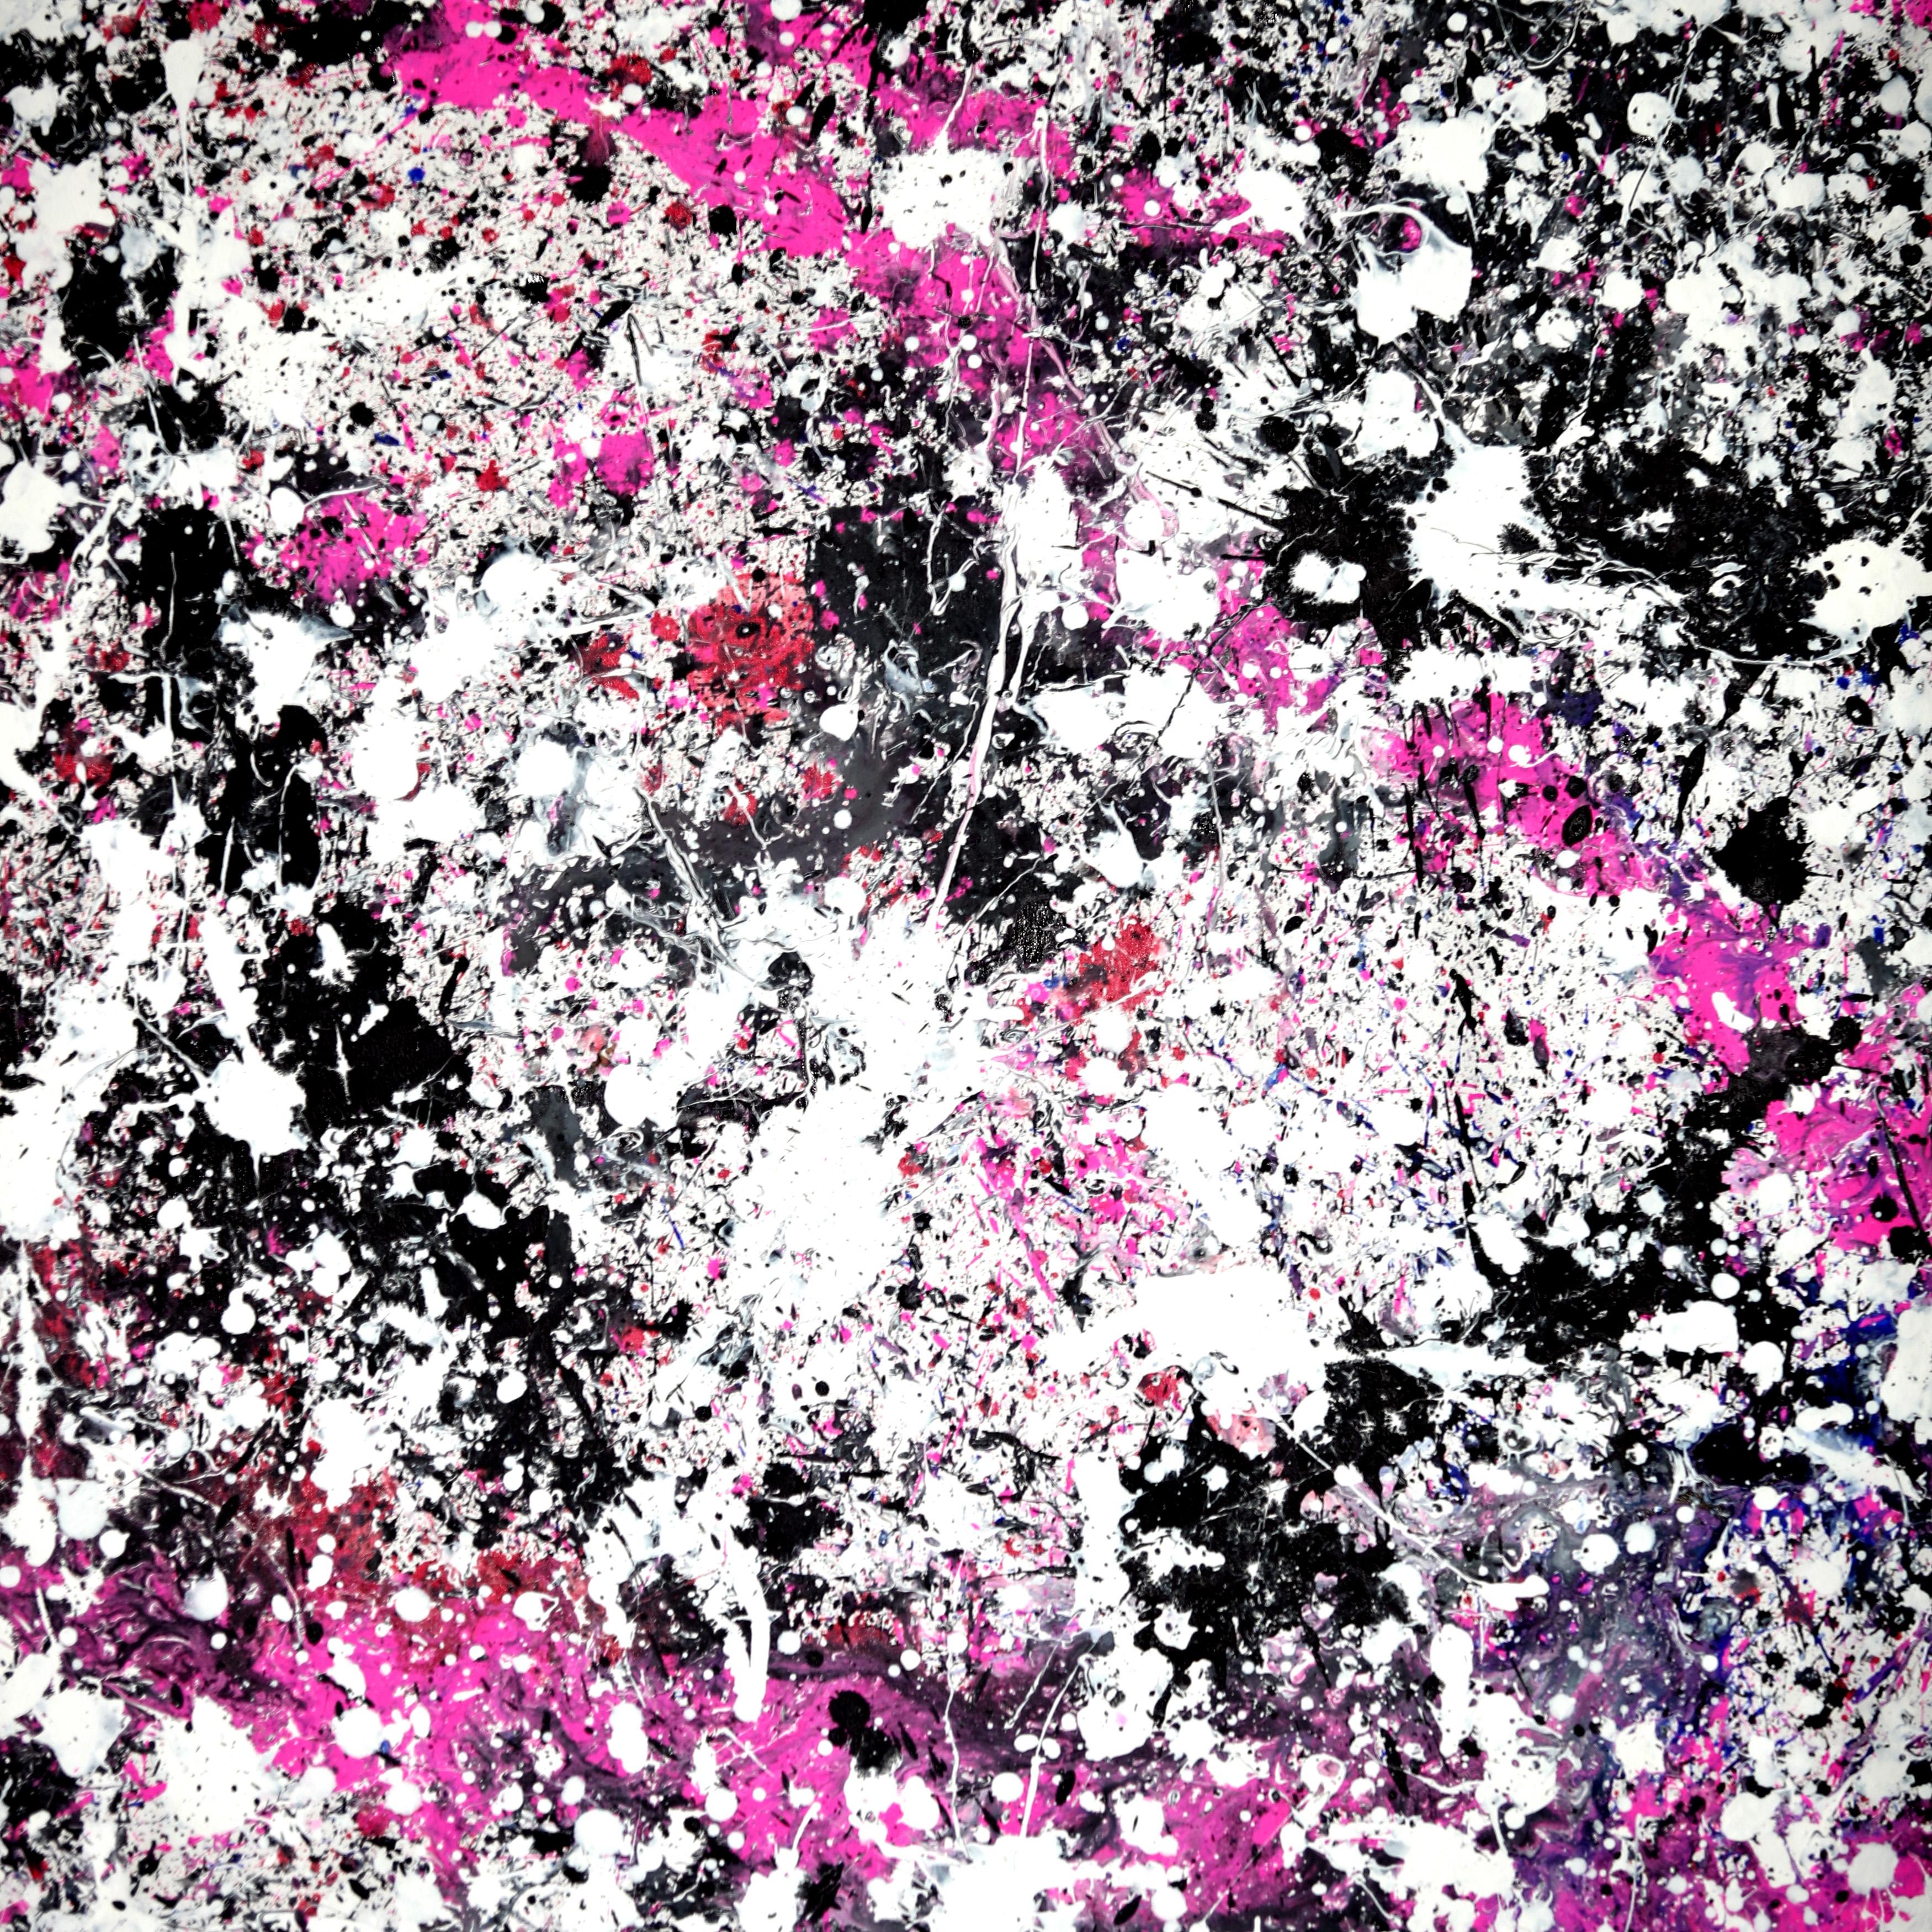 My Pink Universe - Abstract Expressionist Painting by Estelle Asmodelle